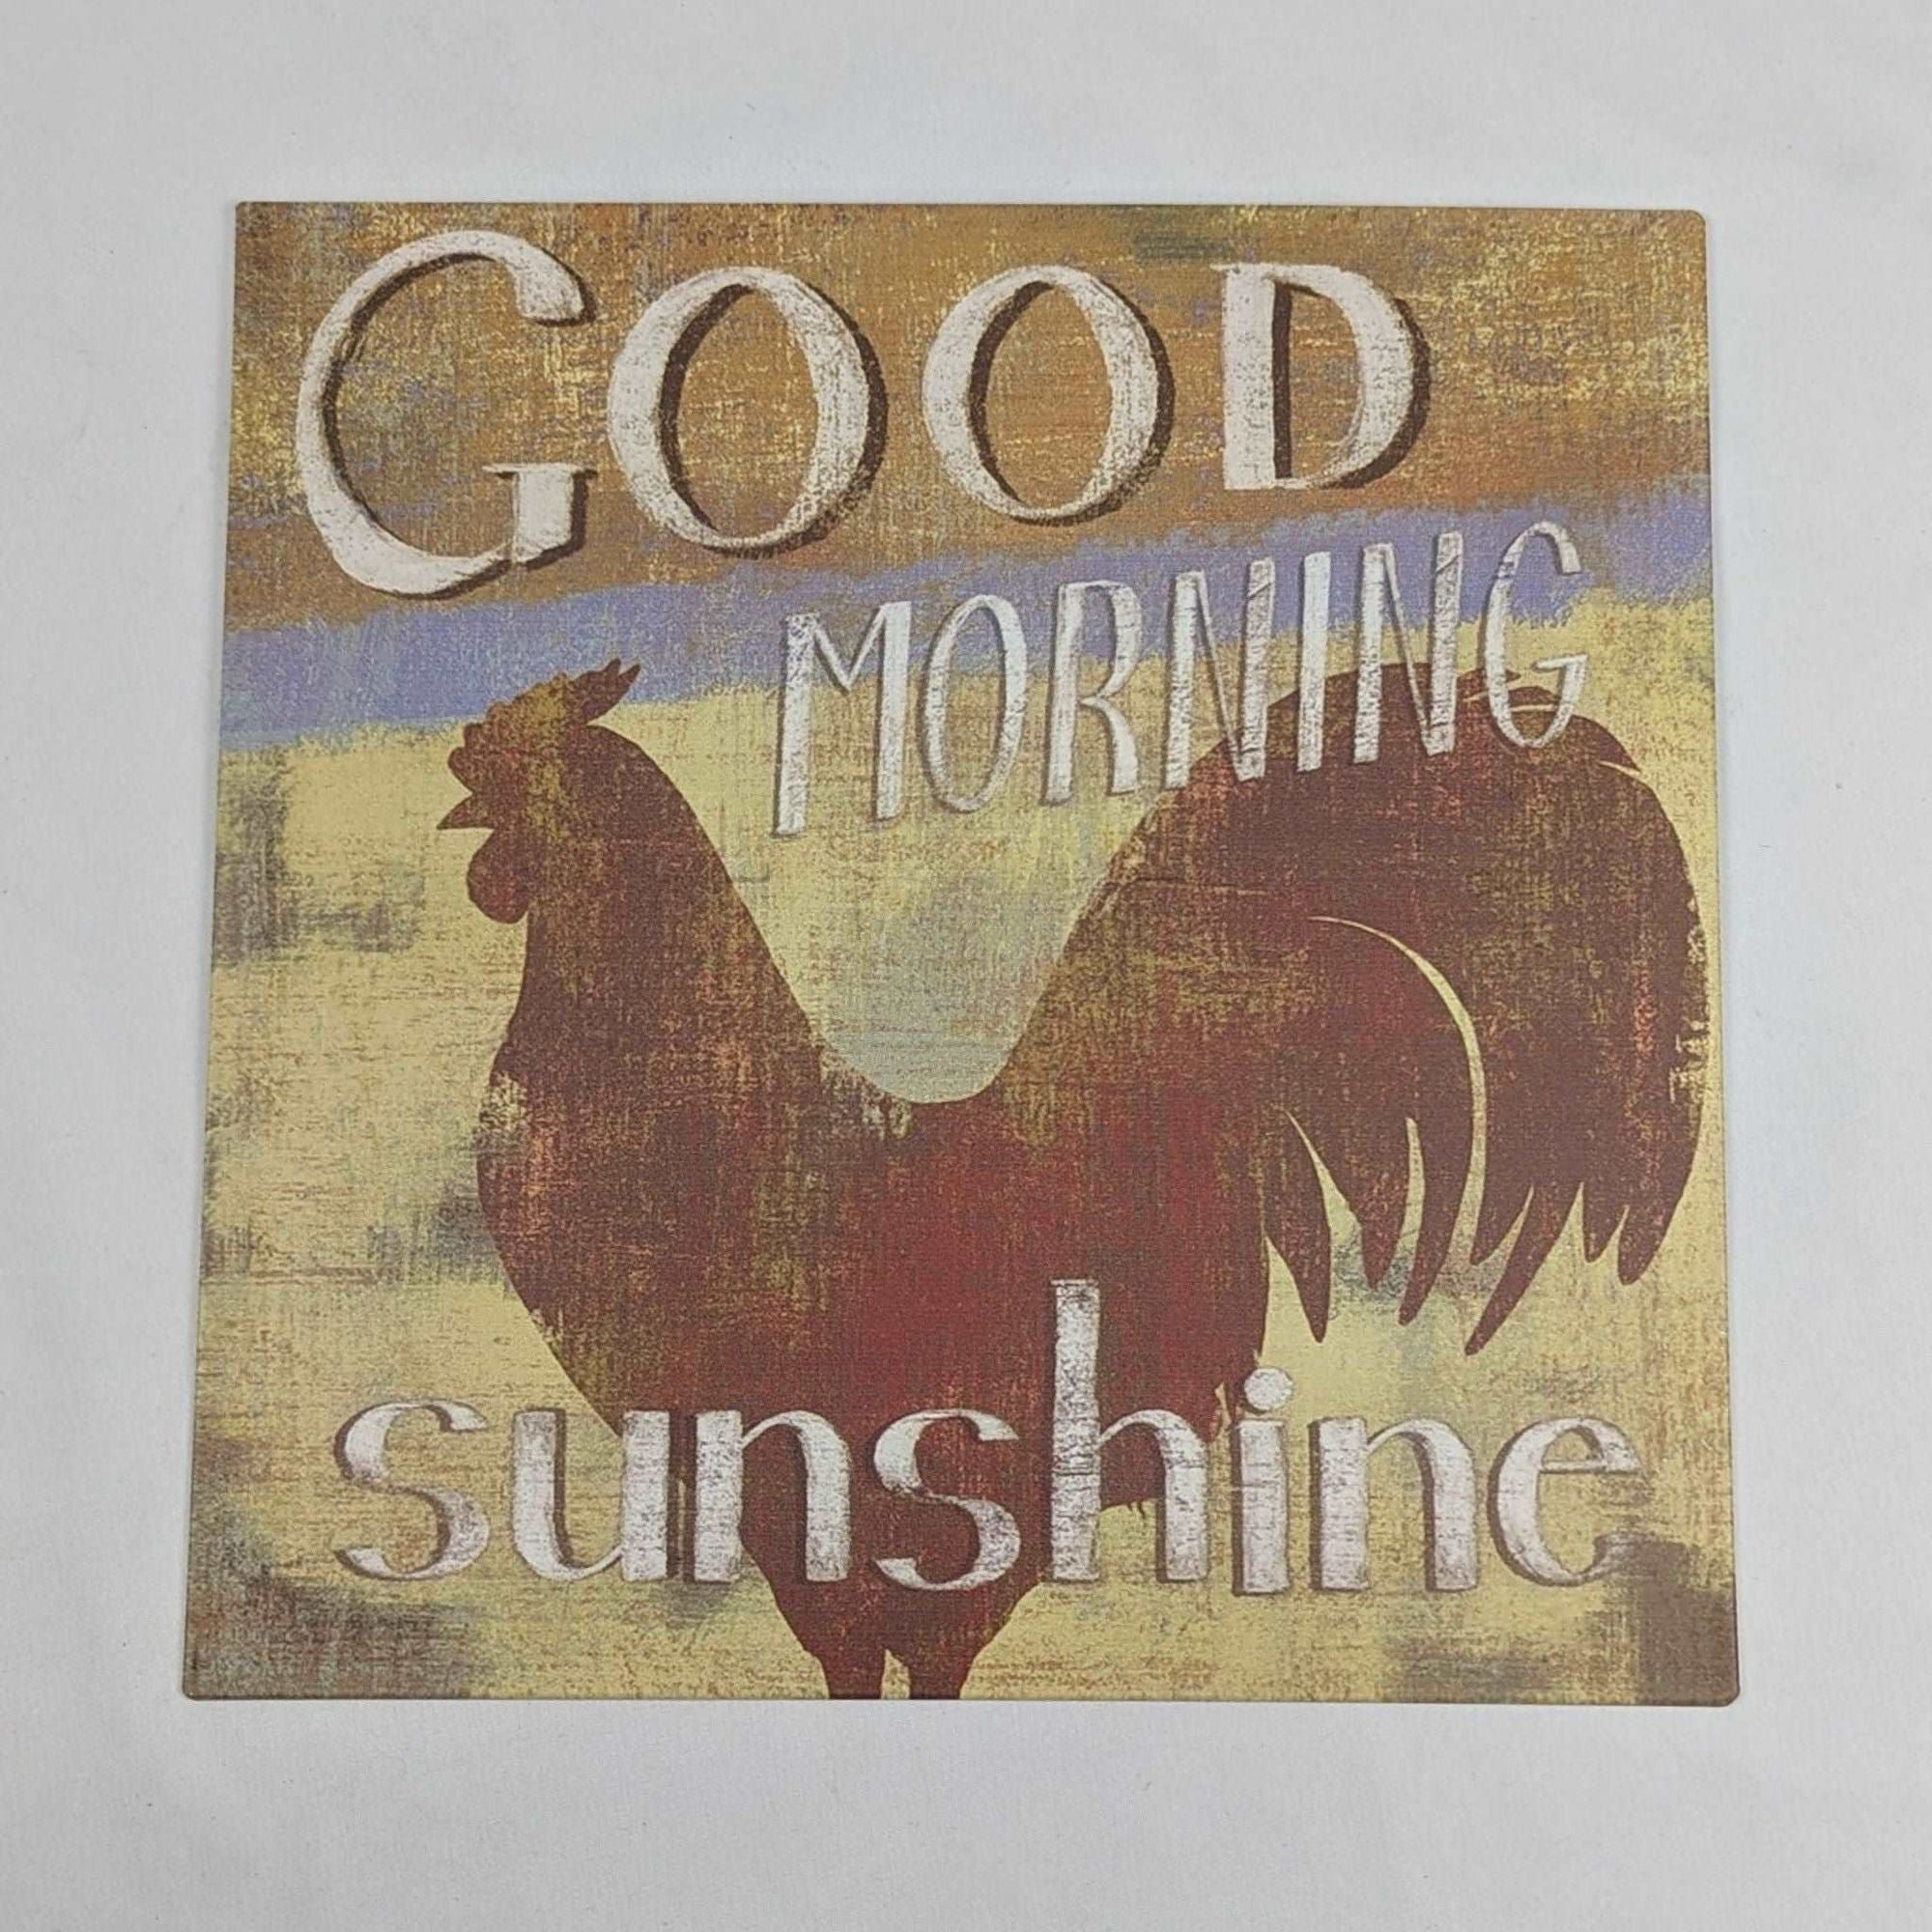 Good Morning Sunshine Rooster Vintage Tin Sign - Cluck It All Farms